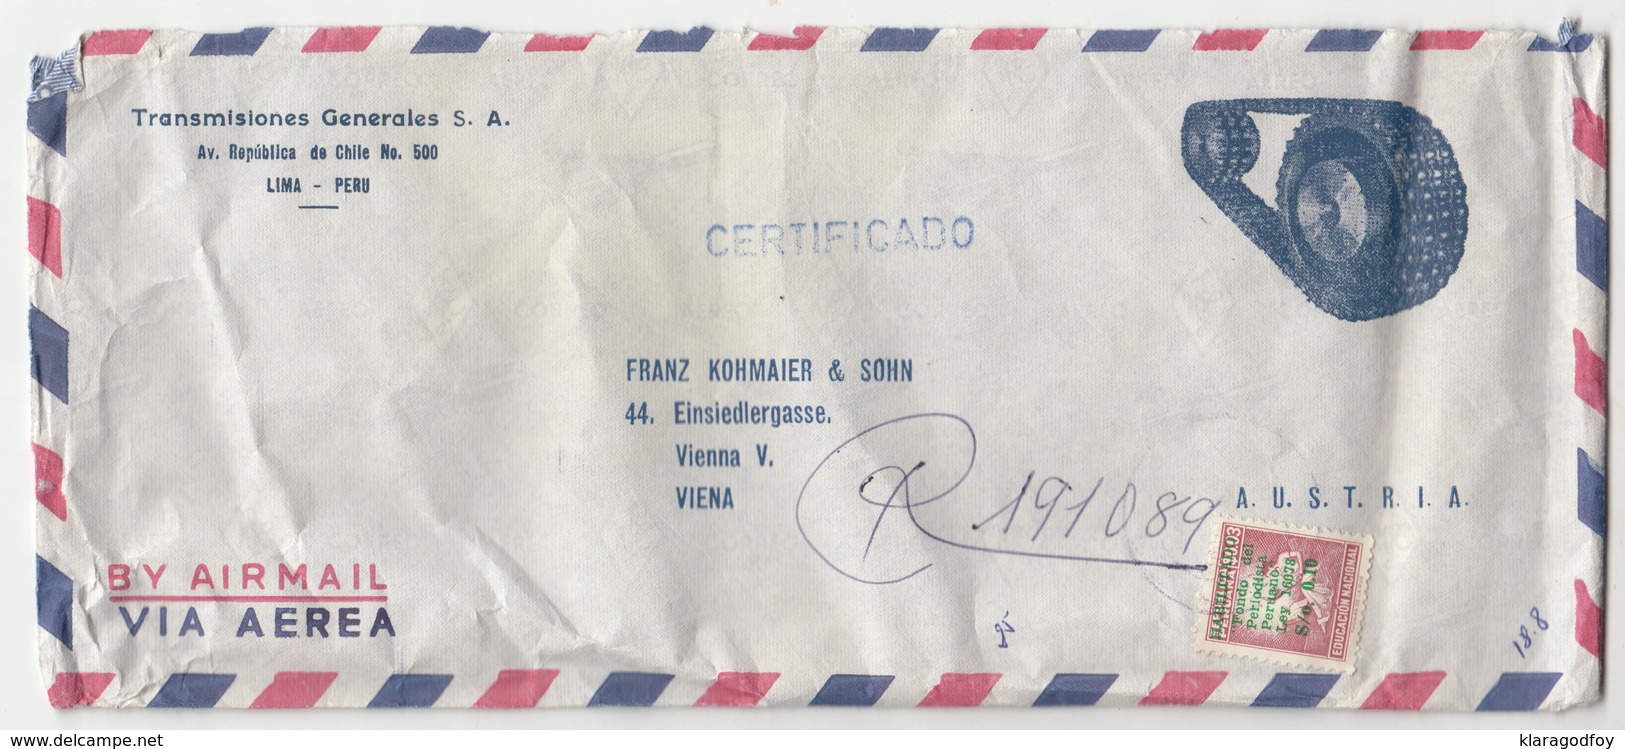 Transmisiones Generales S.A., Lima Company Air Mail Letter Cover Travelled Registered To Wien B190715 - Pérou